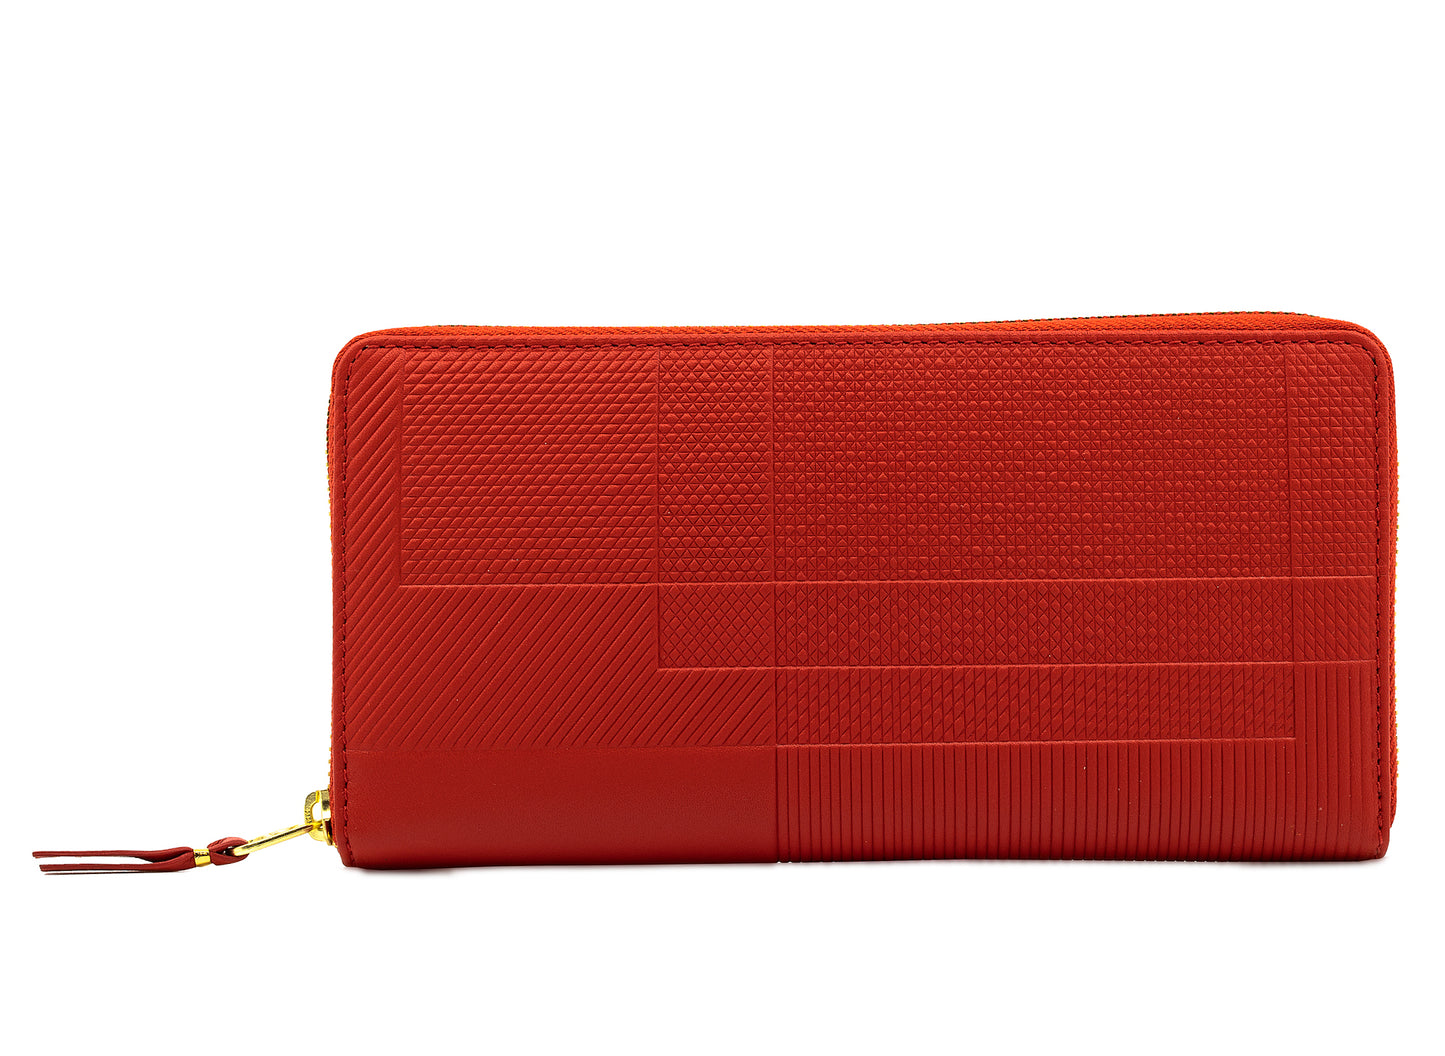 Comme des Garçon Intersection Lines Wallet in Red